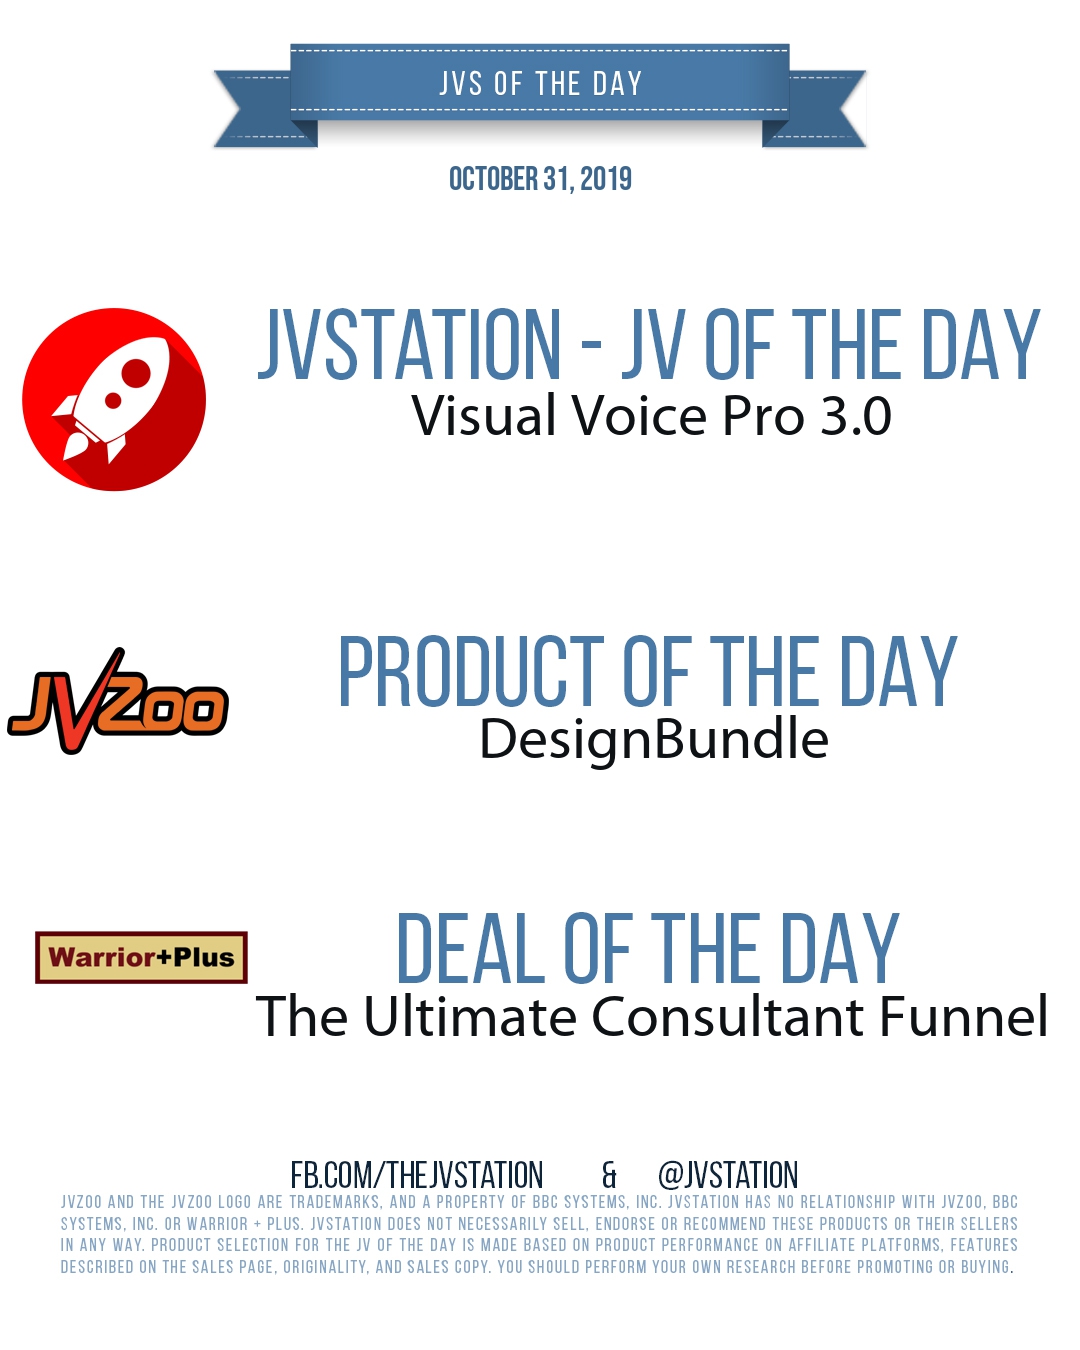 JVs of the day - October 31, 2019